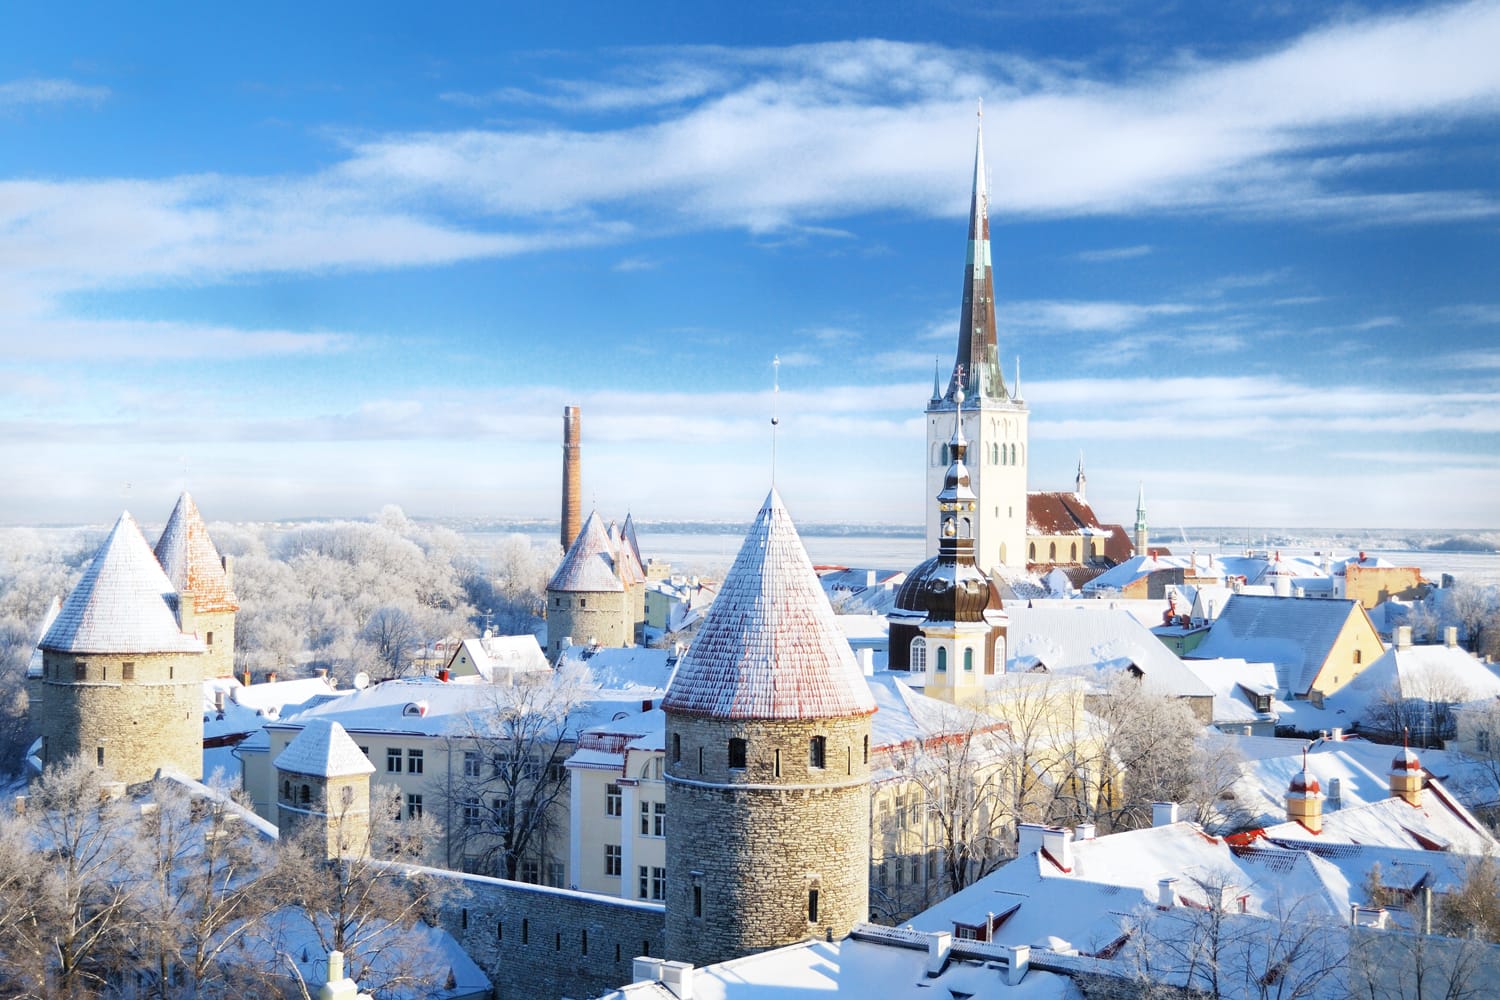 Panoramic view of old part of Tallin, Estonia in winter